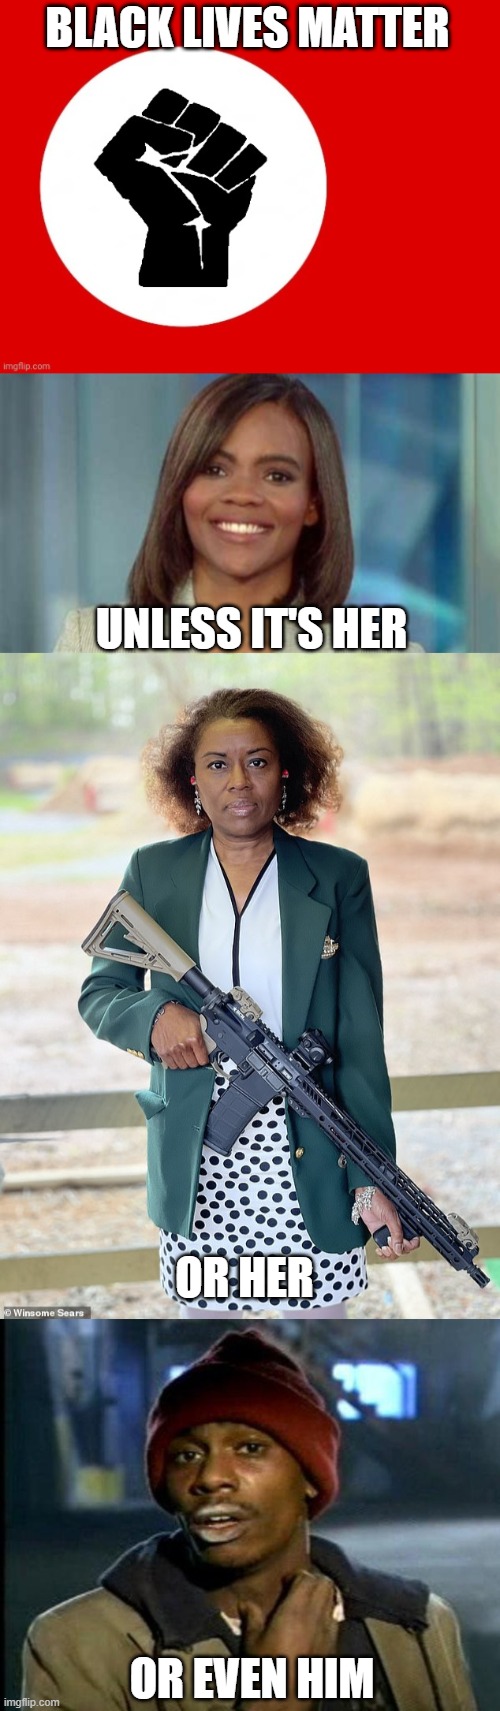 Black lives only matter when they share your opinions | BLACK LIVES MATTER; UNLESS IT'S HER; OR HER; OR EVEN HIM | image tagged in black lives matter,candace owens,winsome sears holding rifle,dave chappelle | made w/ Imgflip meme maker